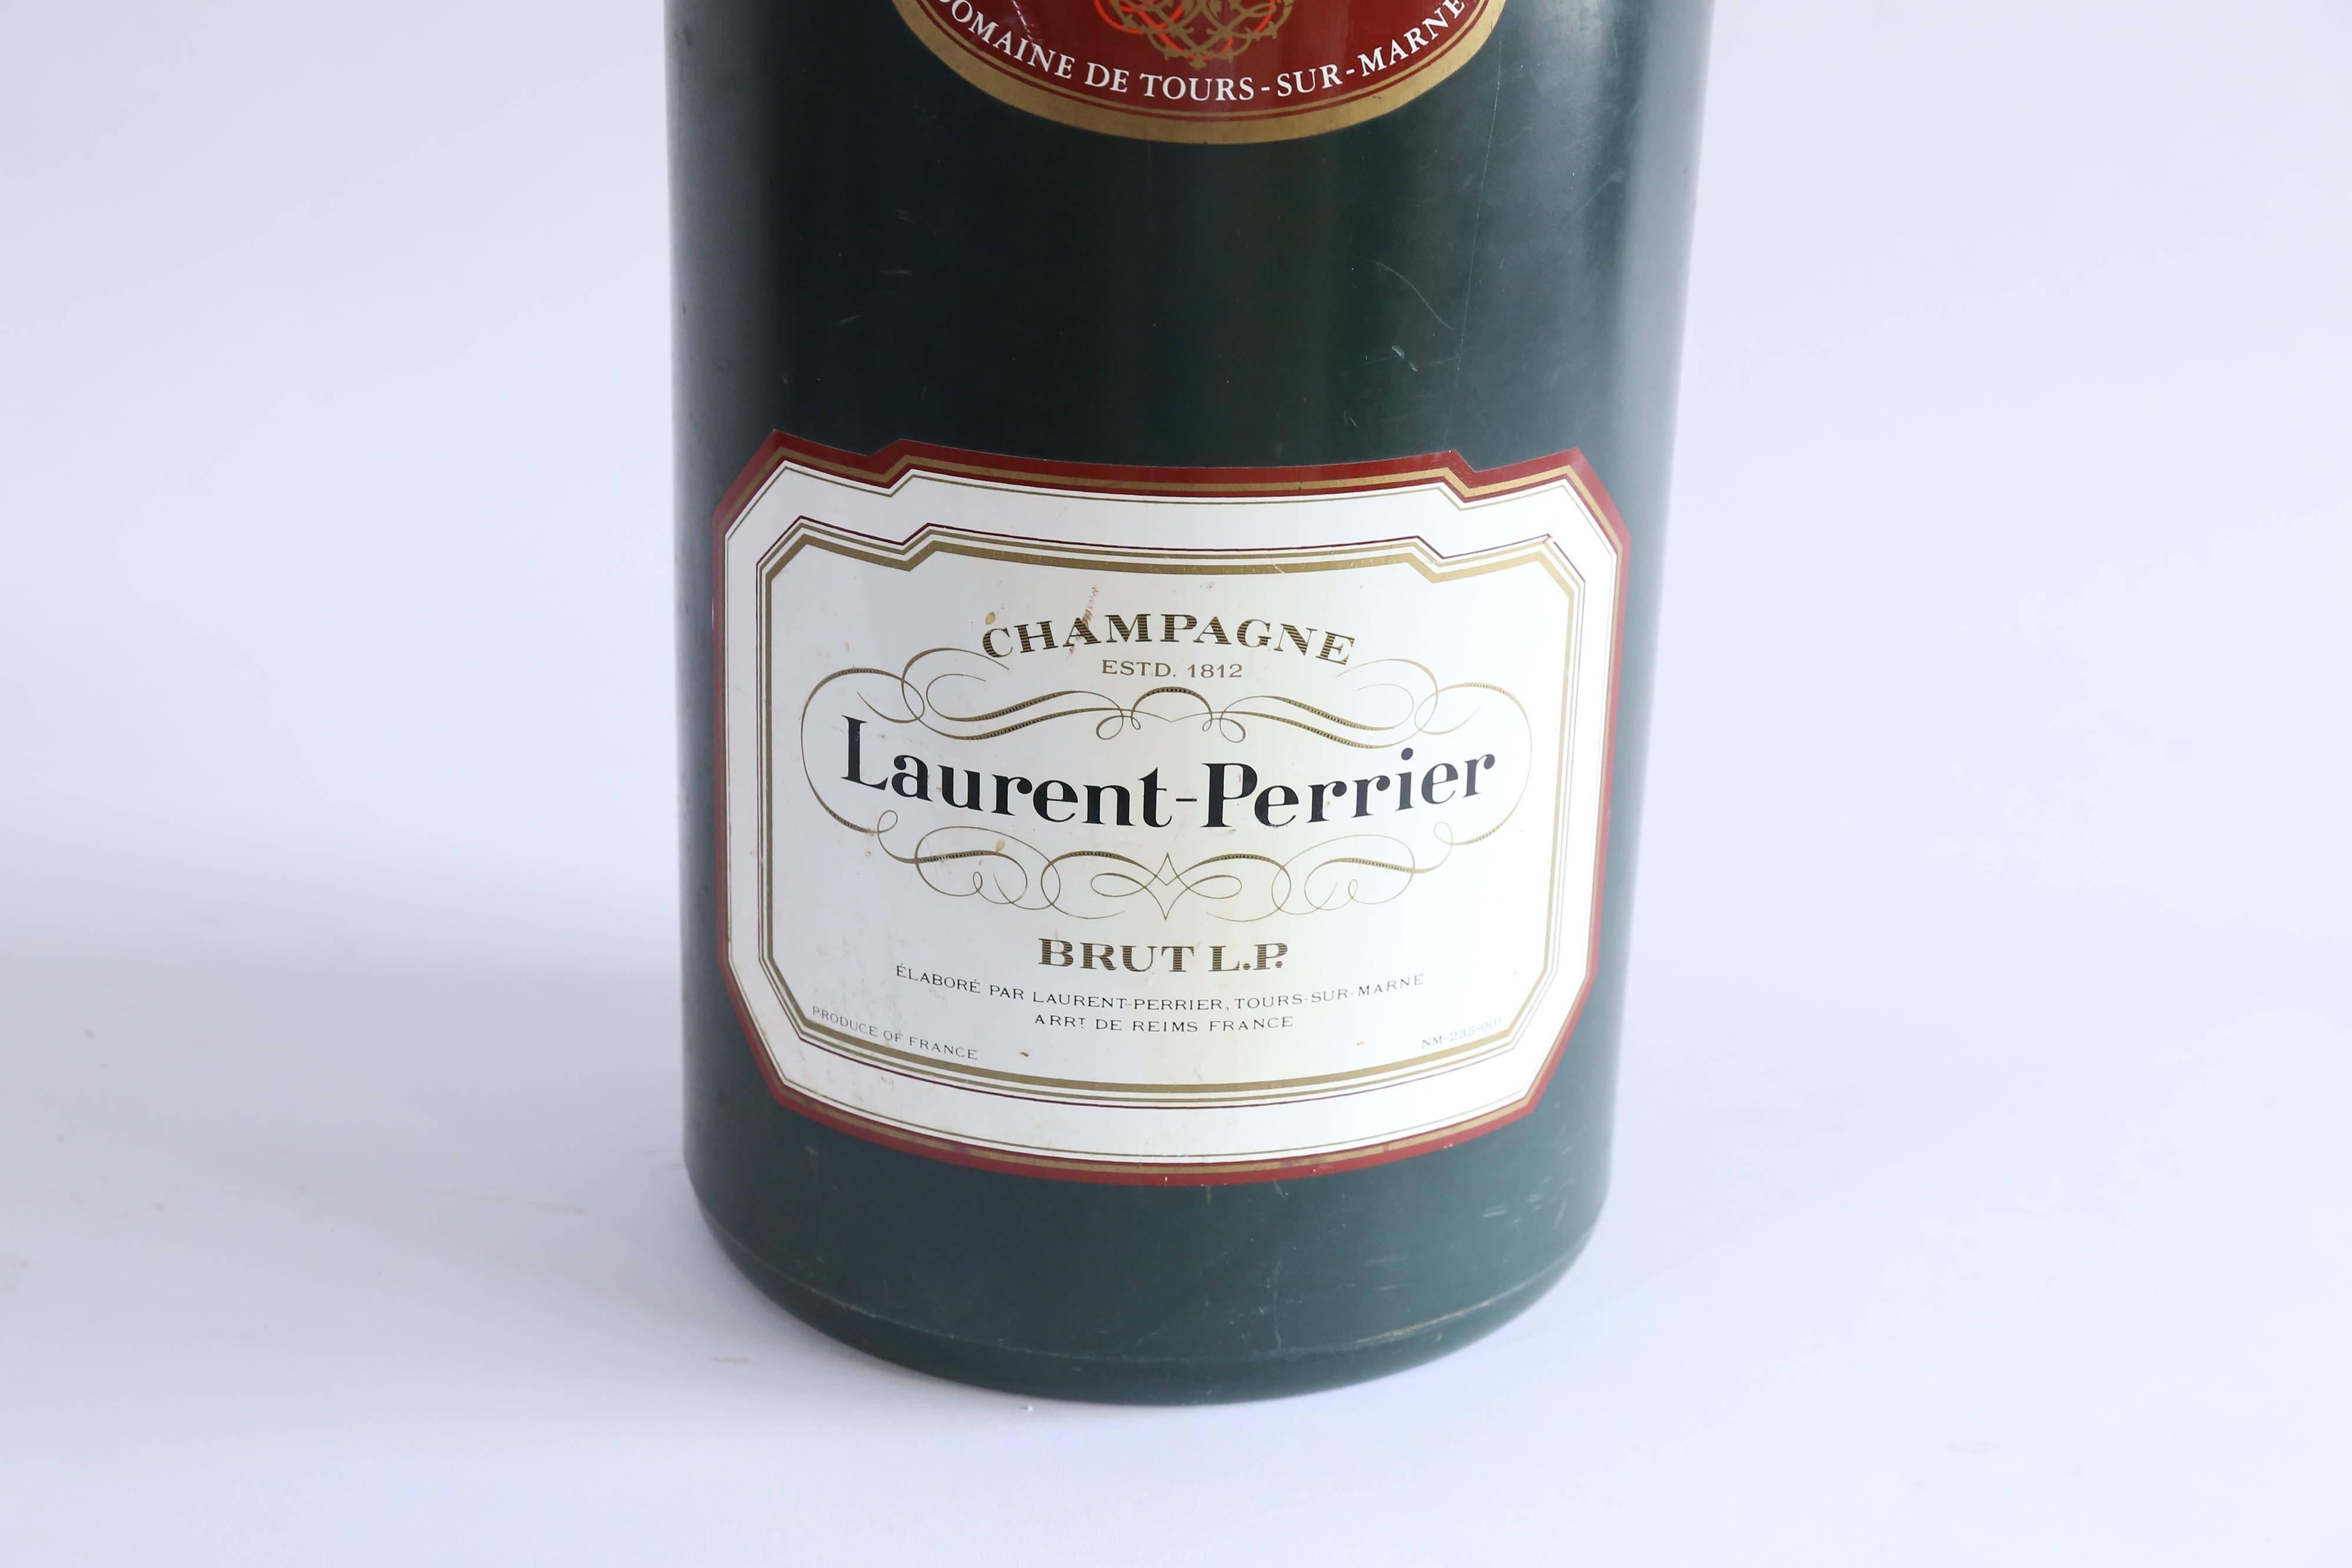 Made from a composite material, this grand display bottle for Brut Champagne is just plain fun.